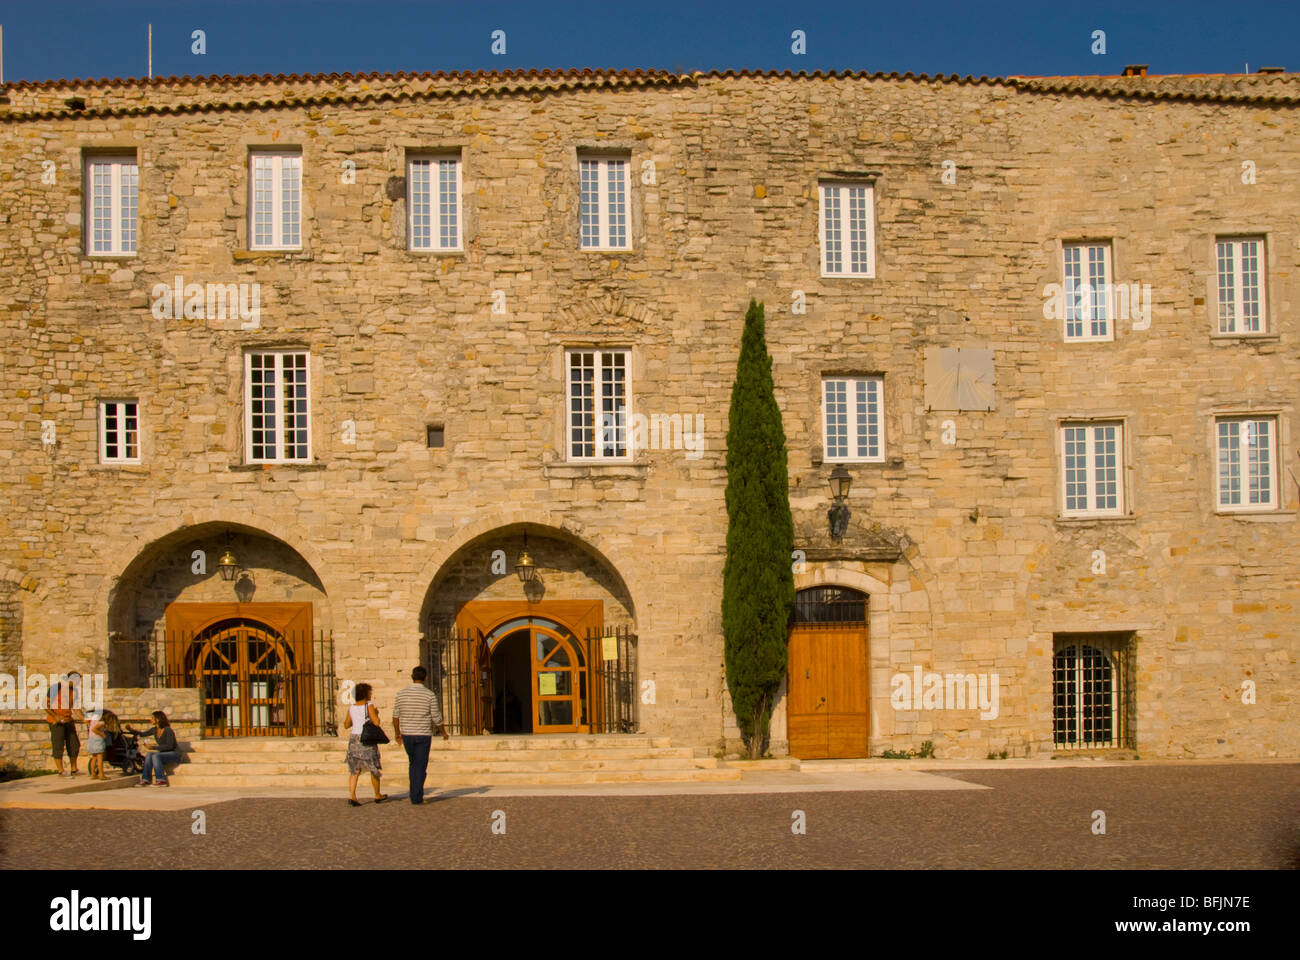 Popular tourist destination of medieval town of Le Castellet Southern France Stock Photo